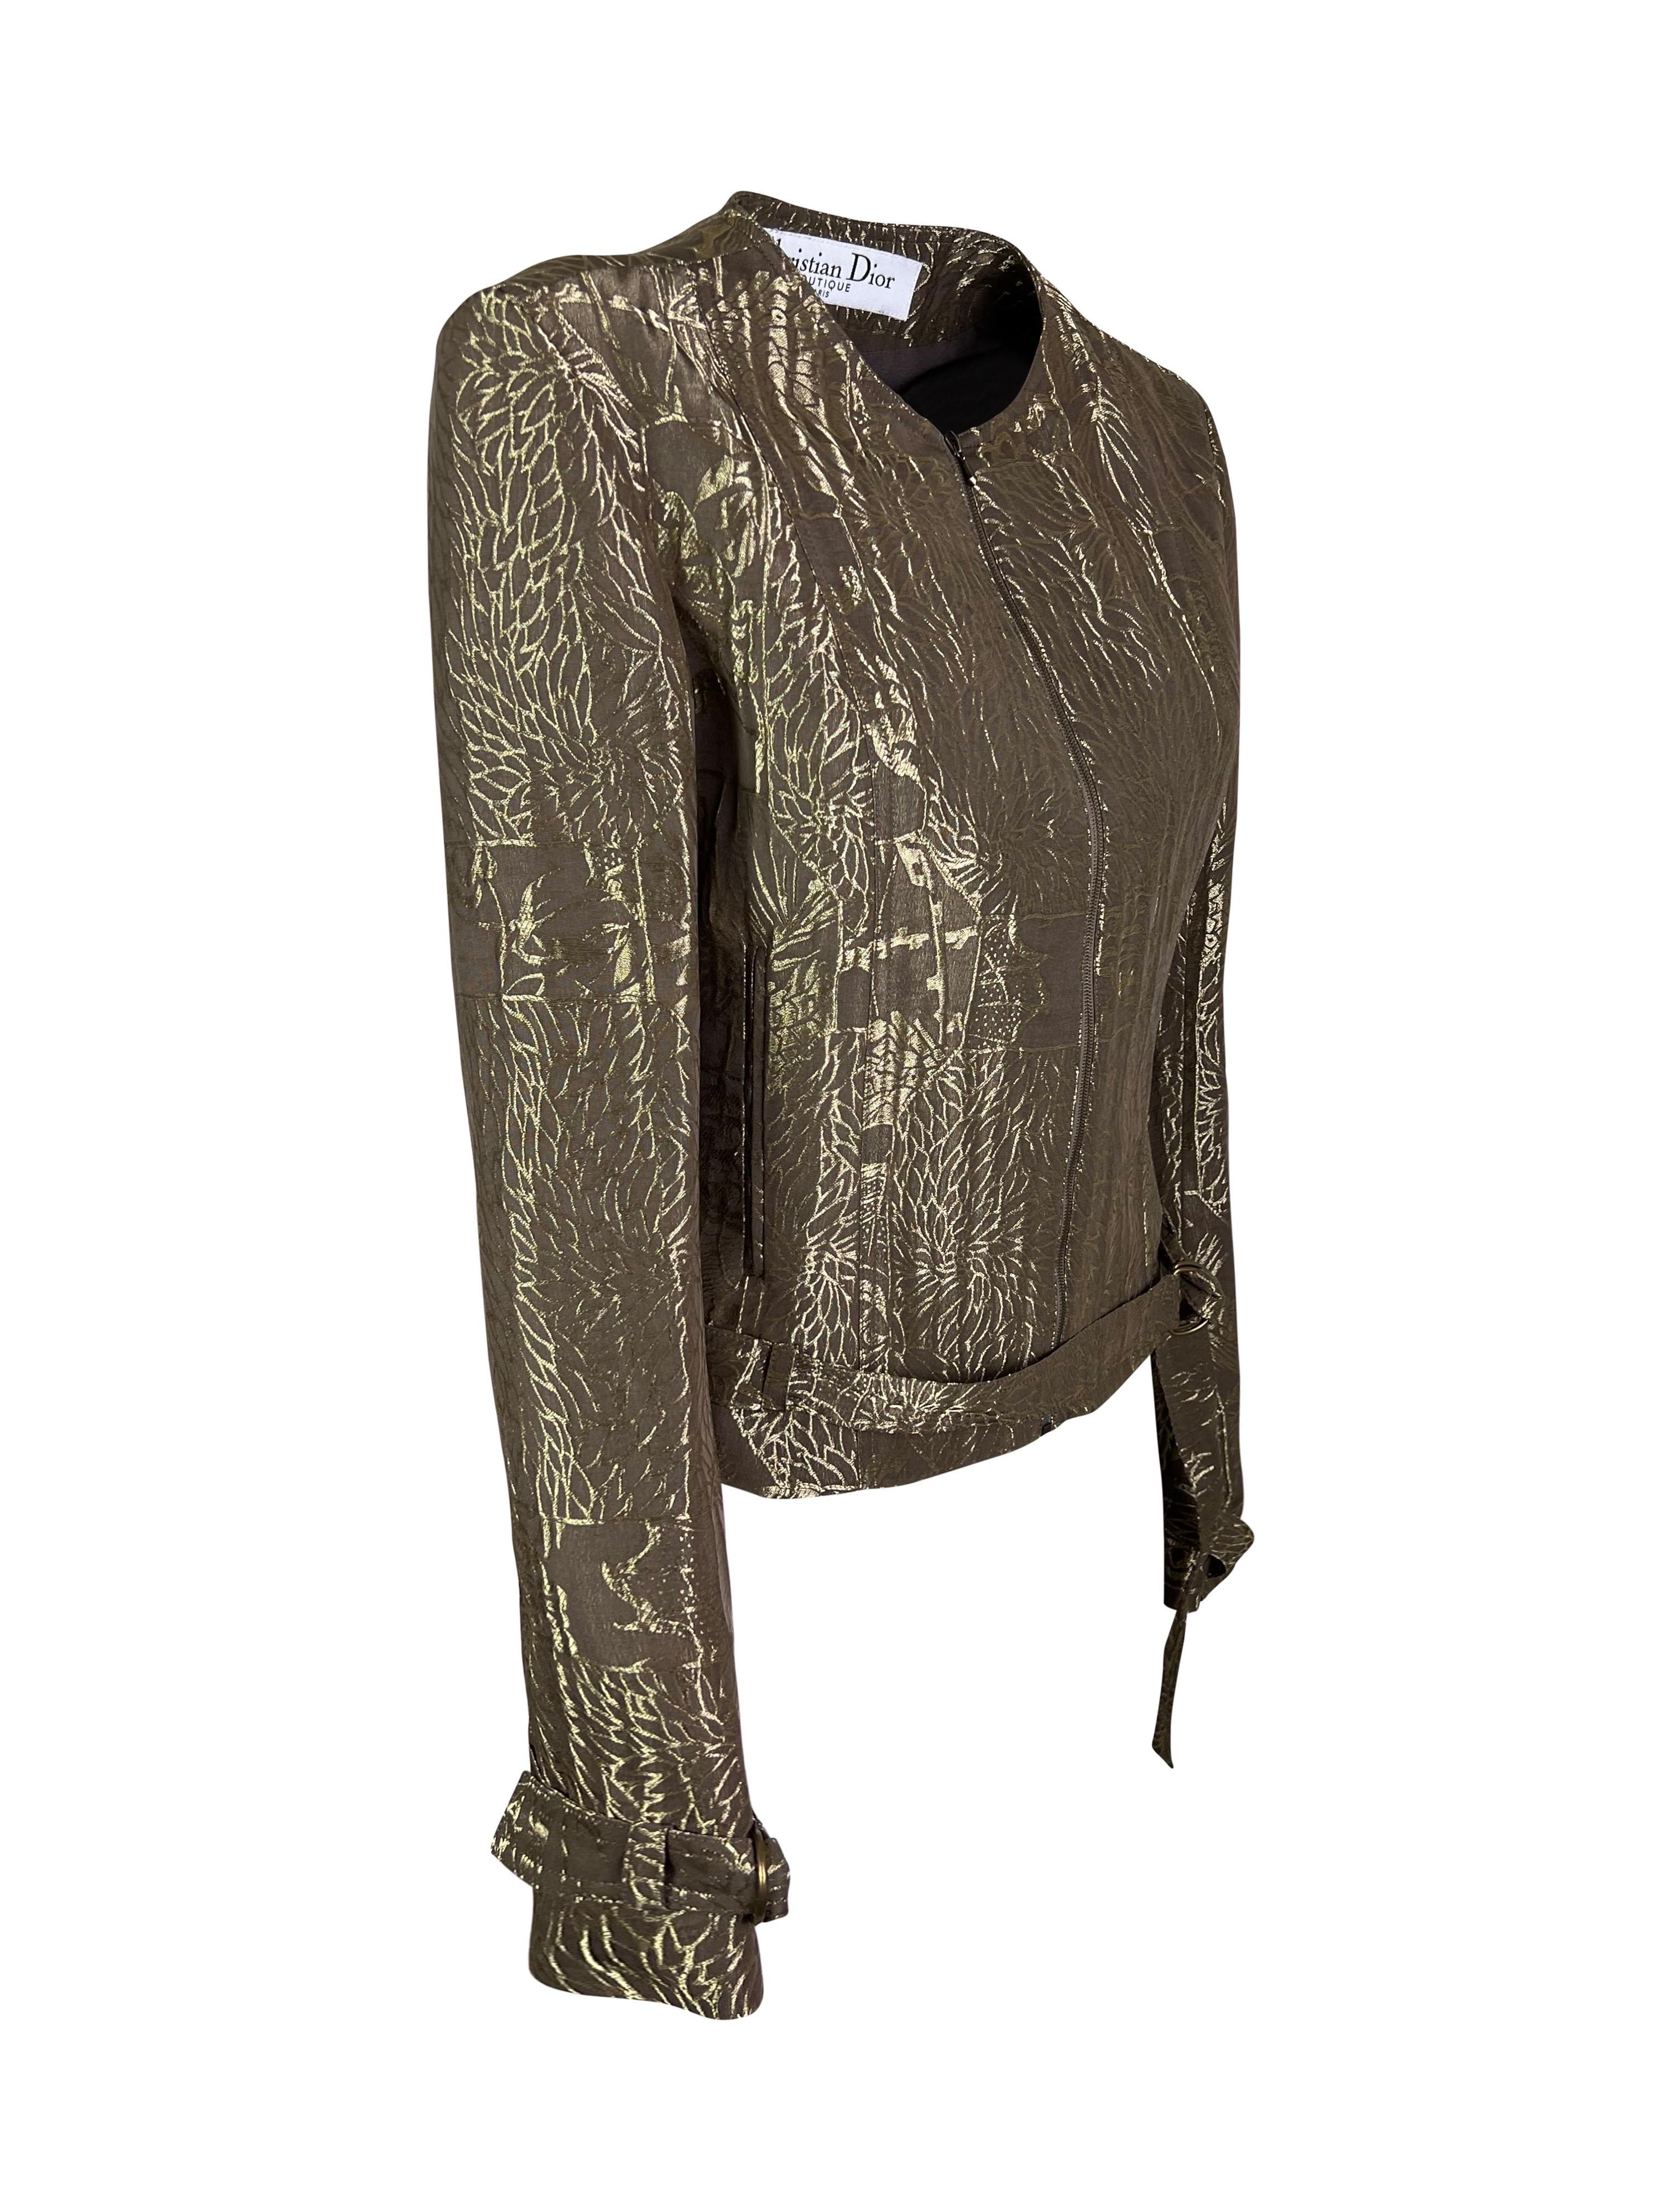 A stunning sample piece from Dior Spring 2003 RTW collection made out of fabulous jacquard with a golden metallic thread. No size identification so please rely strictly on the measurements:

Shoulder to shoulder - 41 cm (16 in)
Armpit to armpit - 46